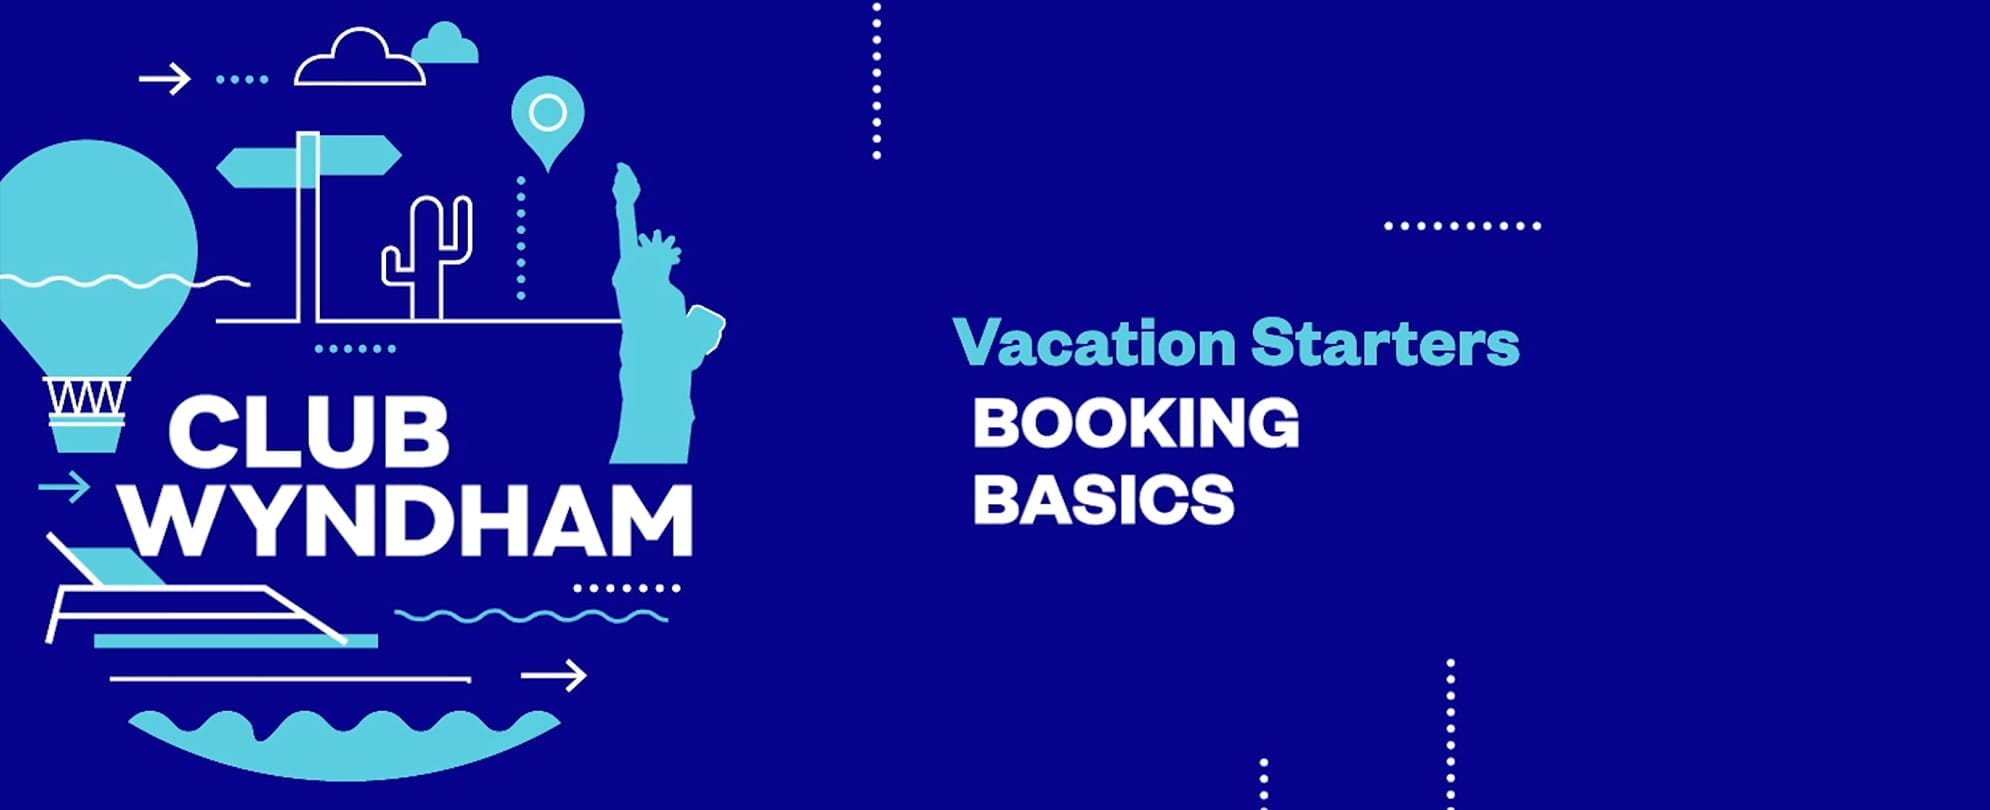 Booking Basics overview from the Club Wyndham Vacation Starters video series